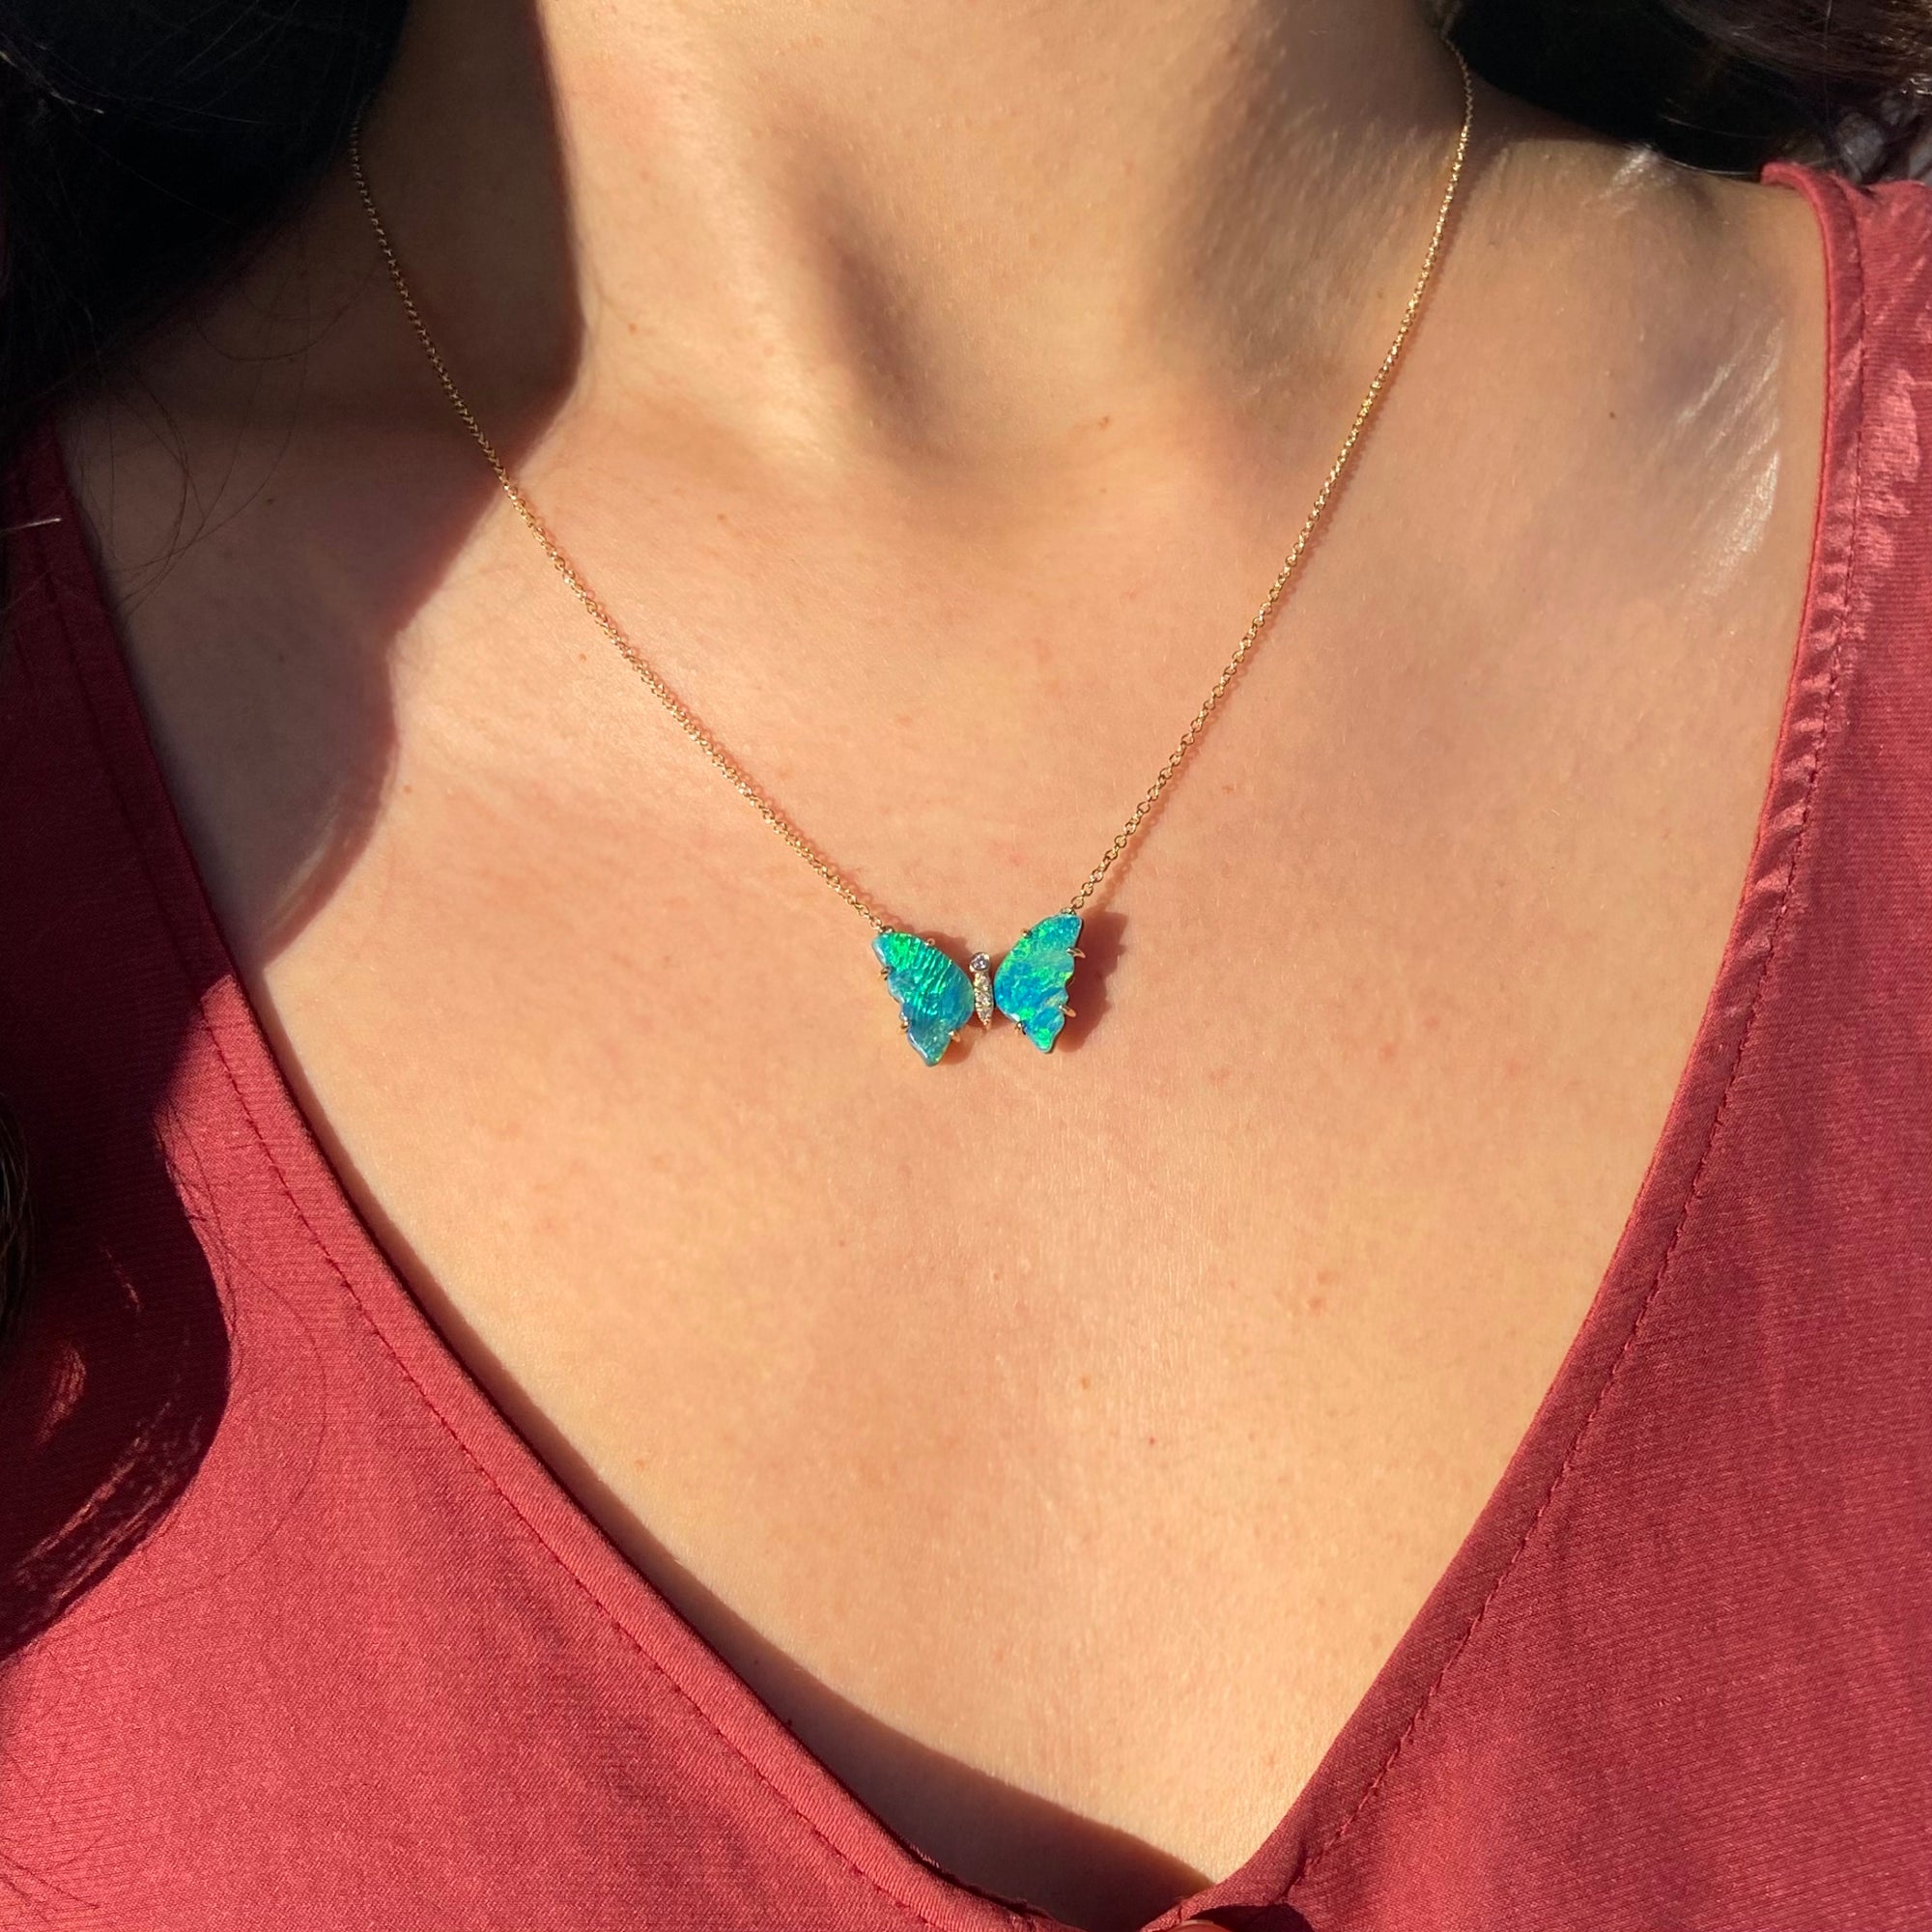 Opal Butterfly Necklace with Diamonds and Prongs